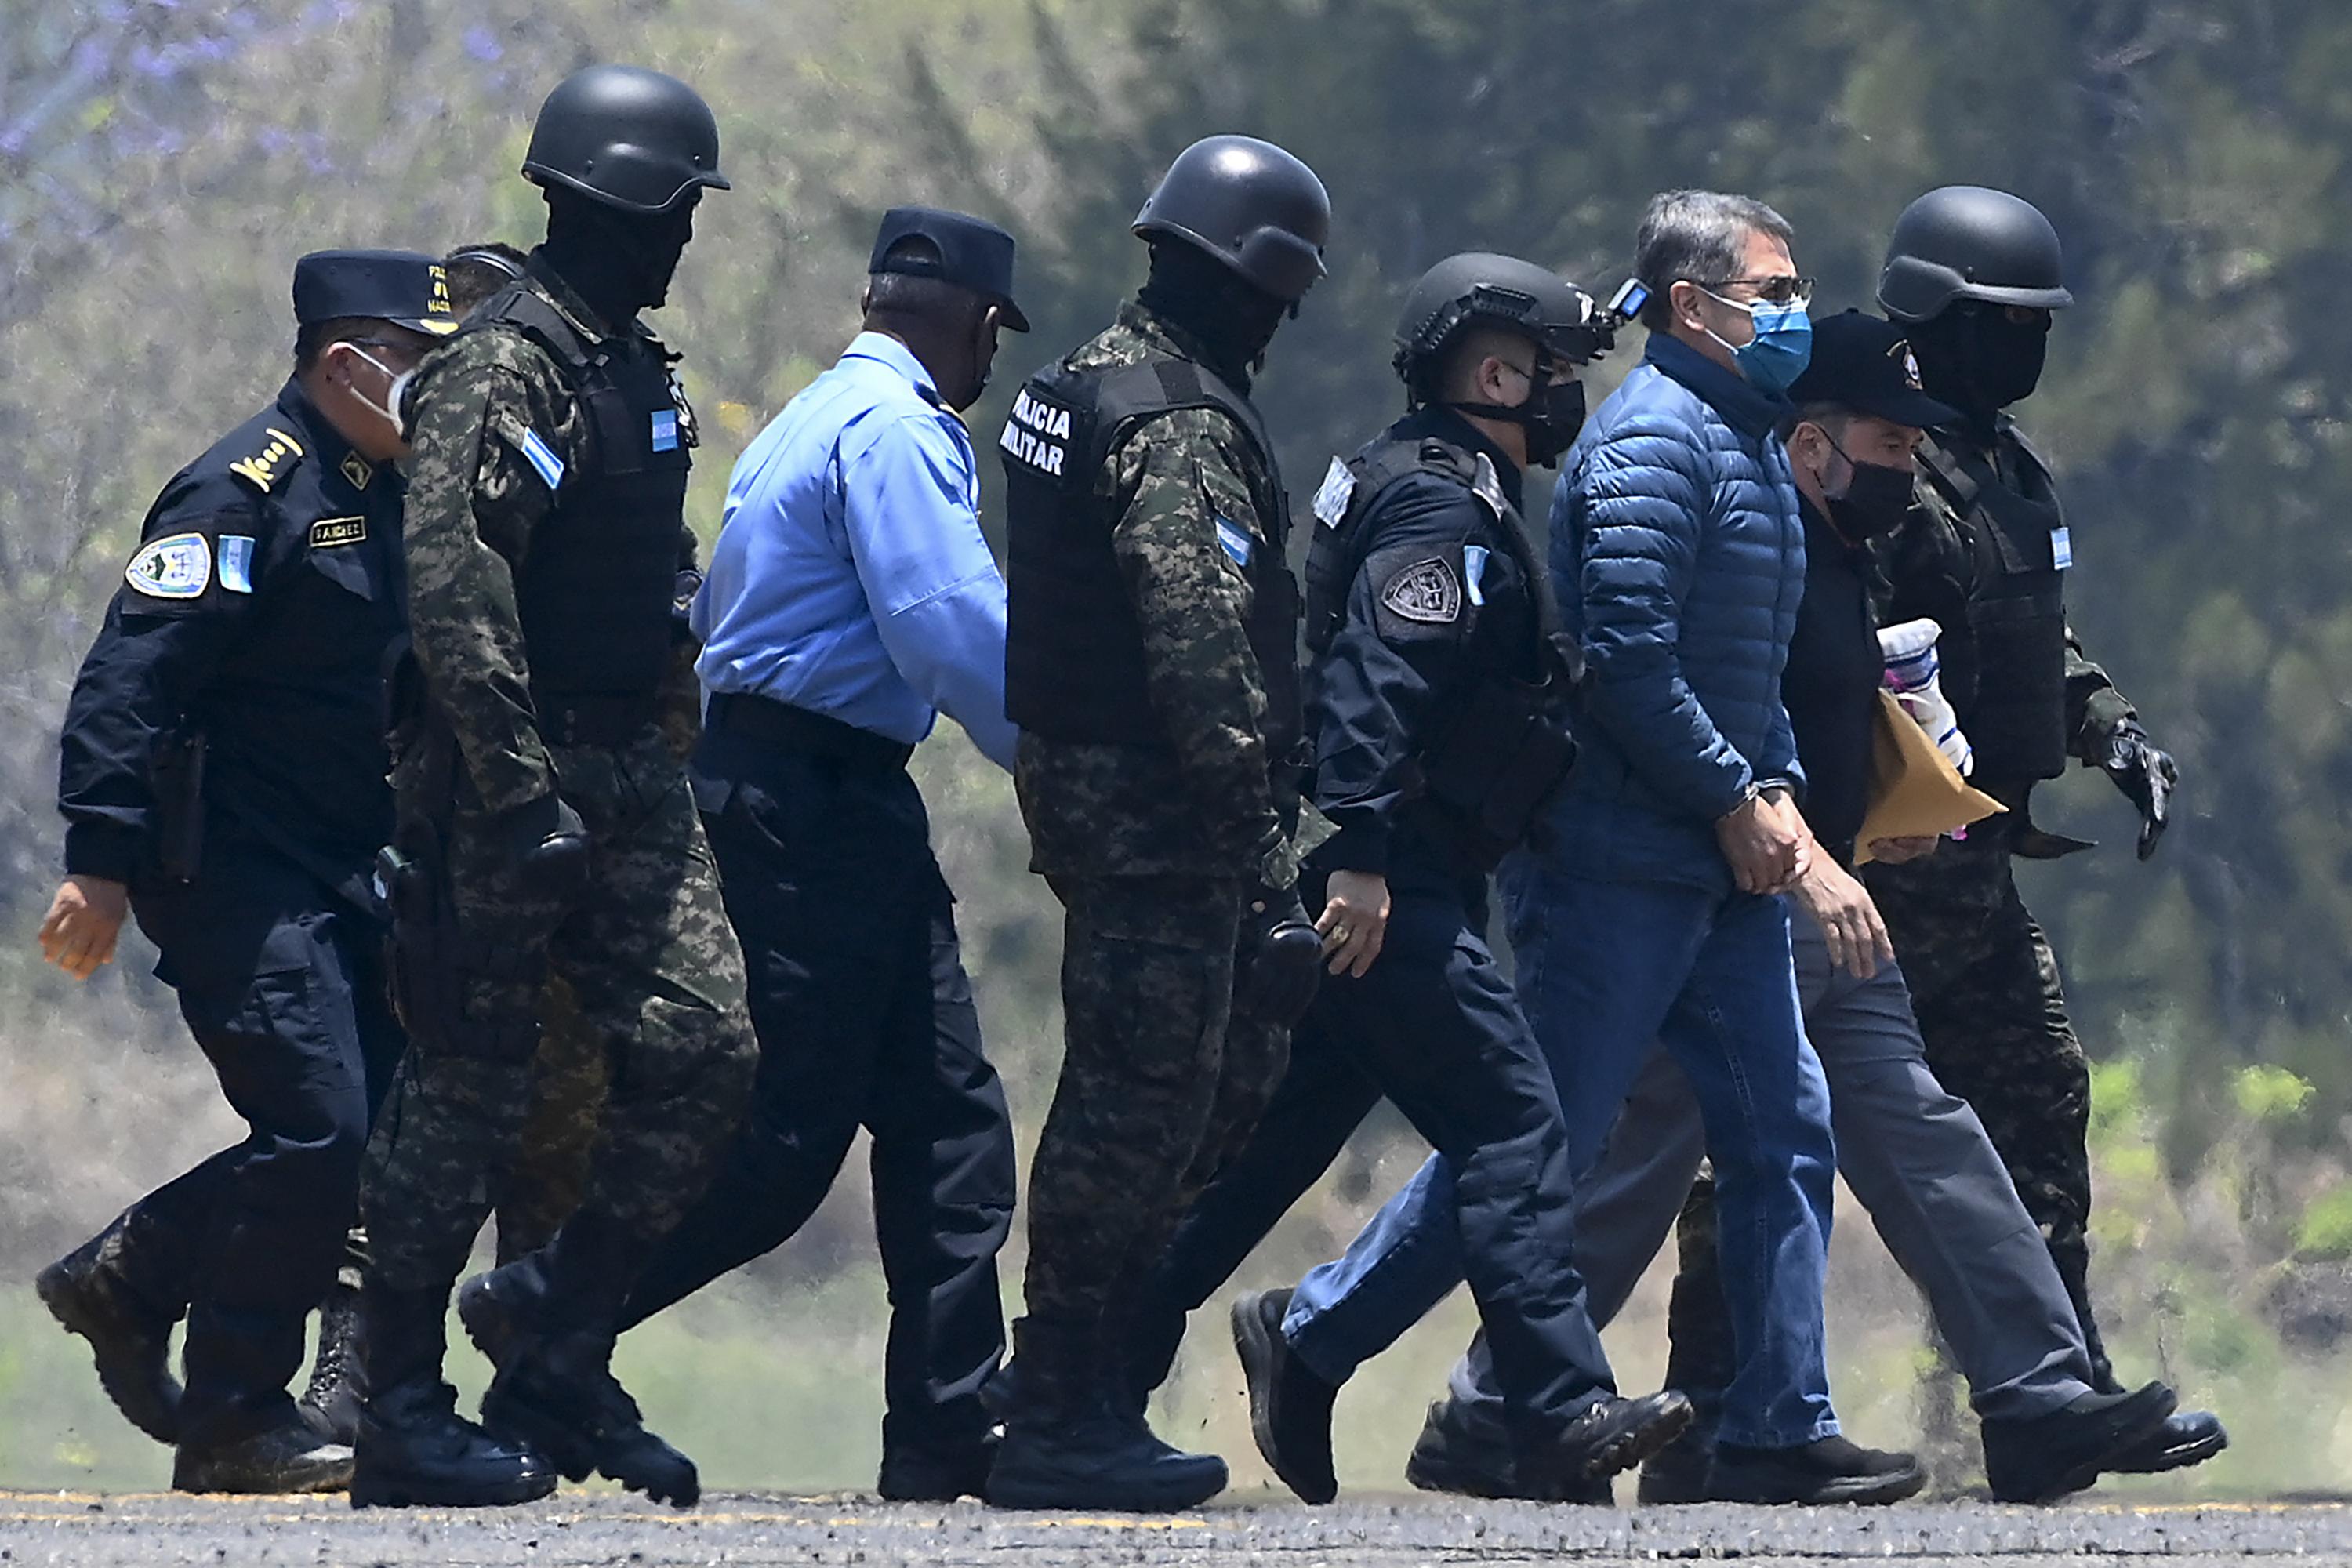 Juan Orlando Hernandez, escorted by police officers at a Honduran Air Force base on April 21, 2022, the day he was extradited to the United States on drug trafficking charges. Photo Orlando Sierra/AFP